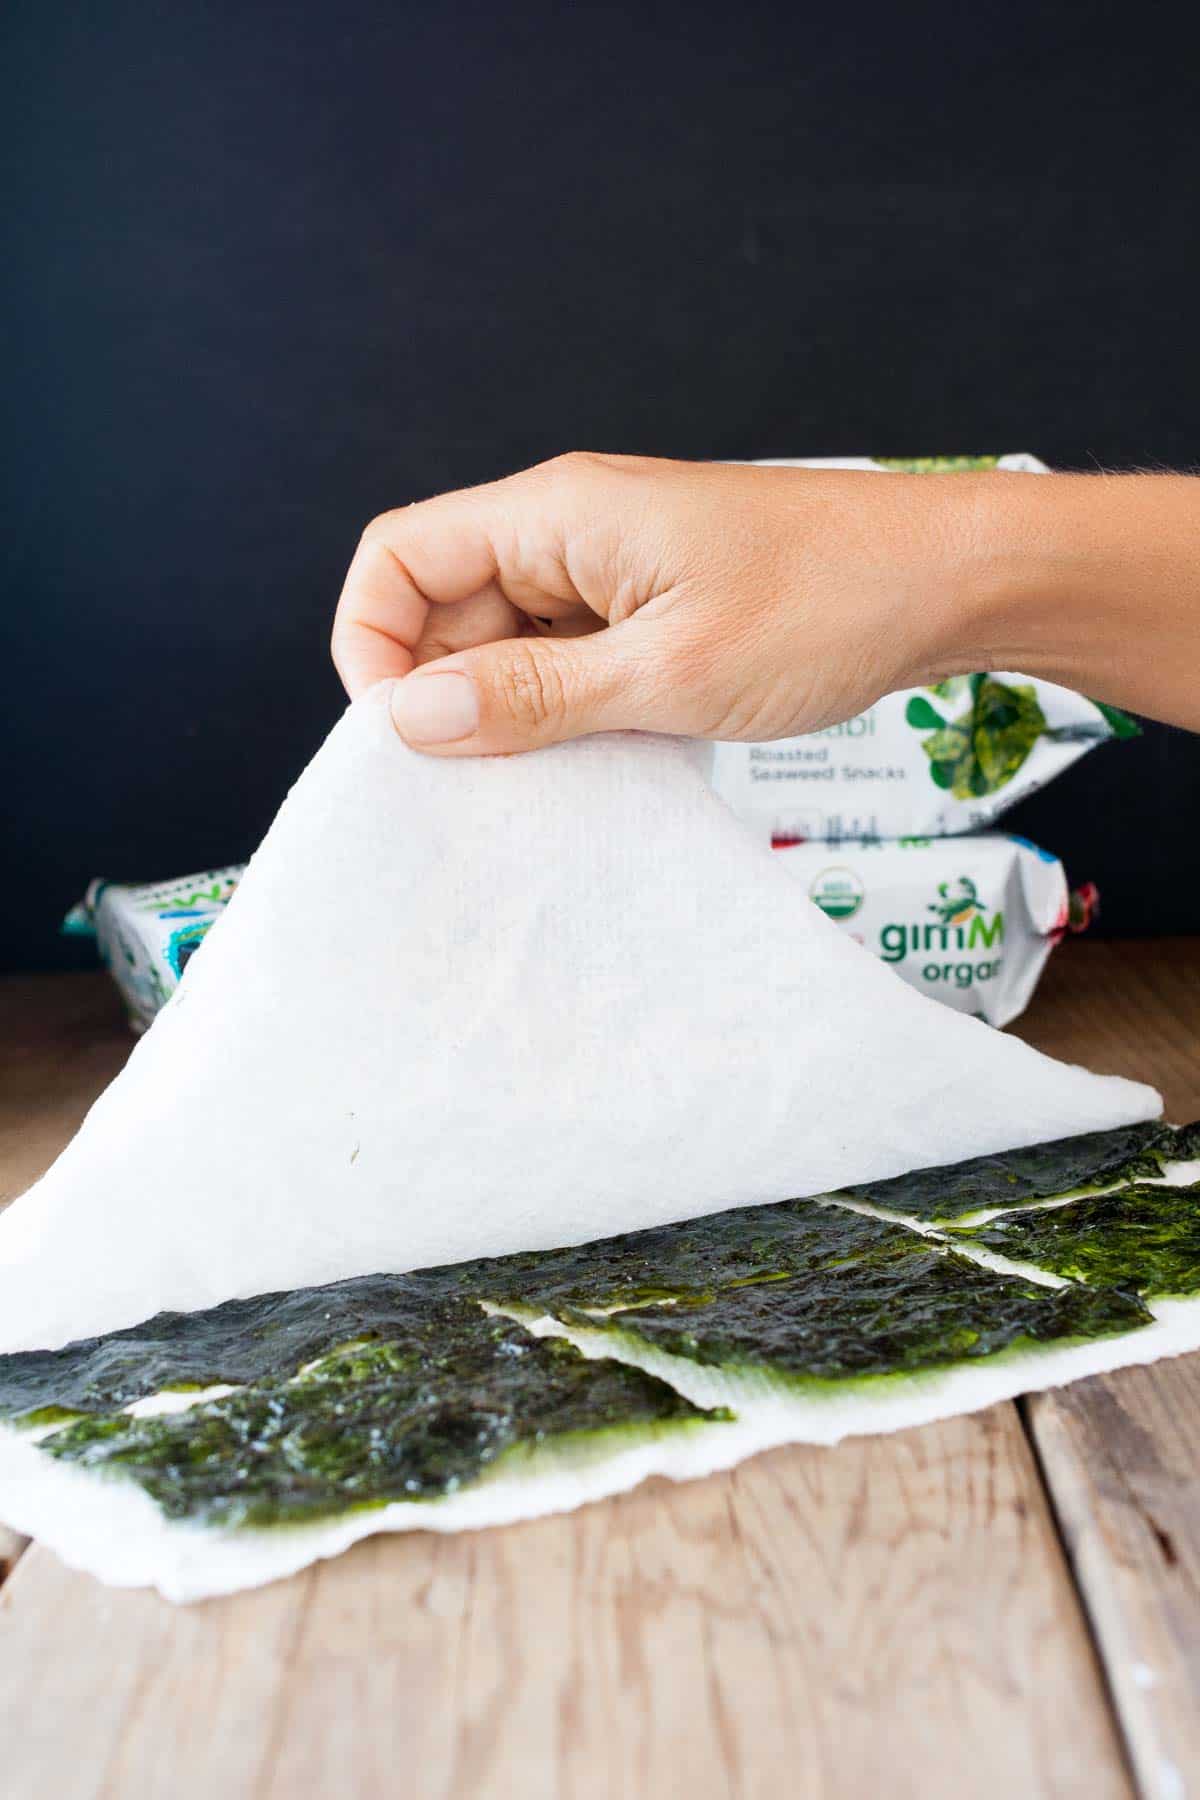 seaweed wrappers between paper towels on a wooden surface with a hand reaching in to lift the paper towel